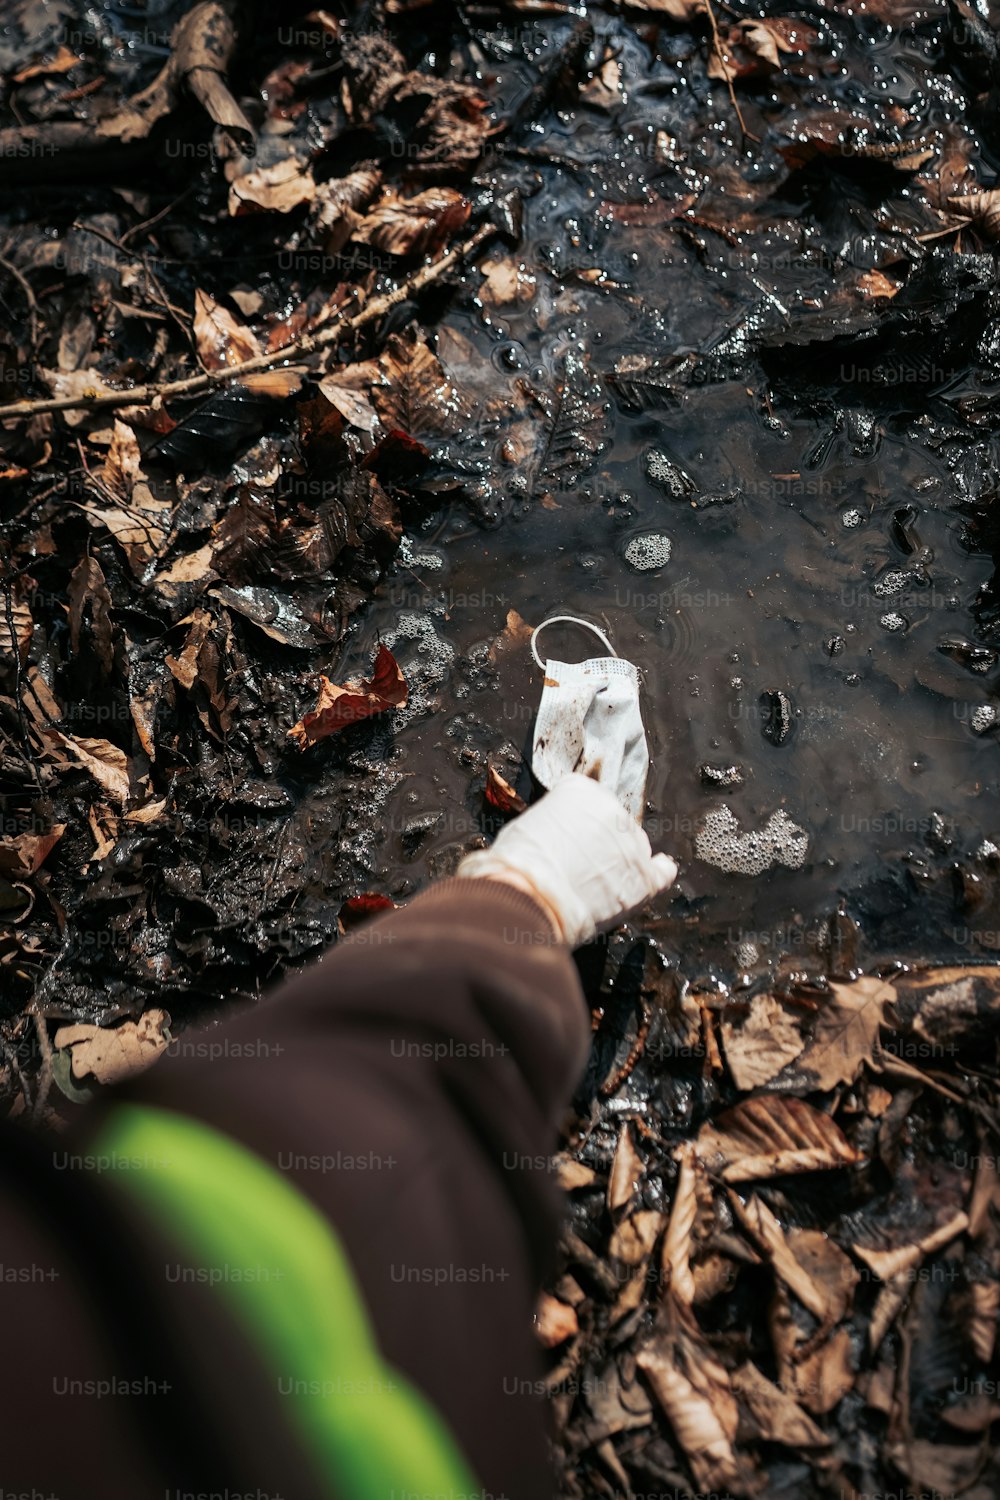 a person holding something in their hand near a puddle of water